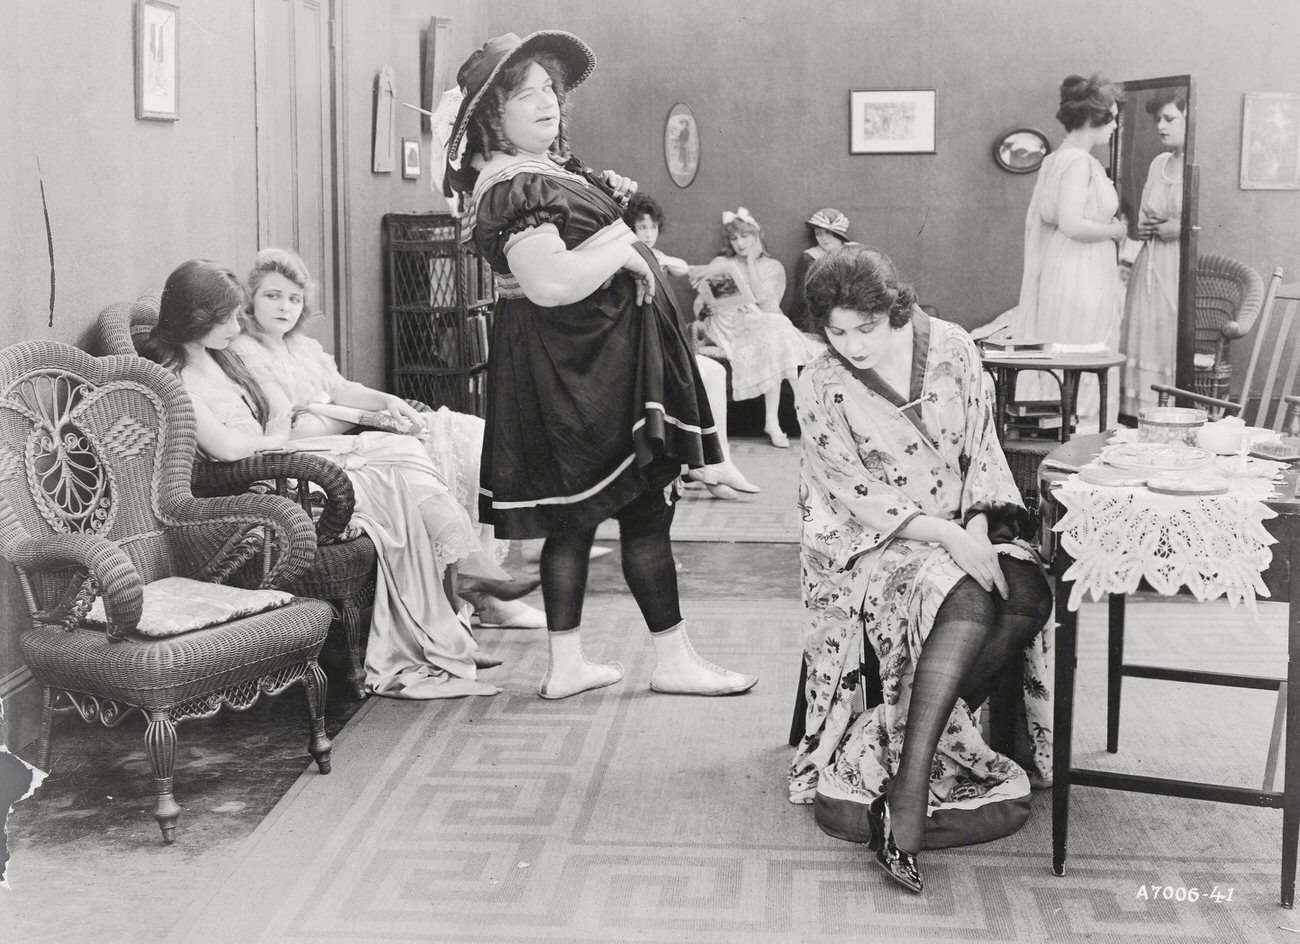 Fatty Arbuckle In Dress, Comedy Act, 1918.